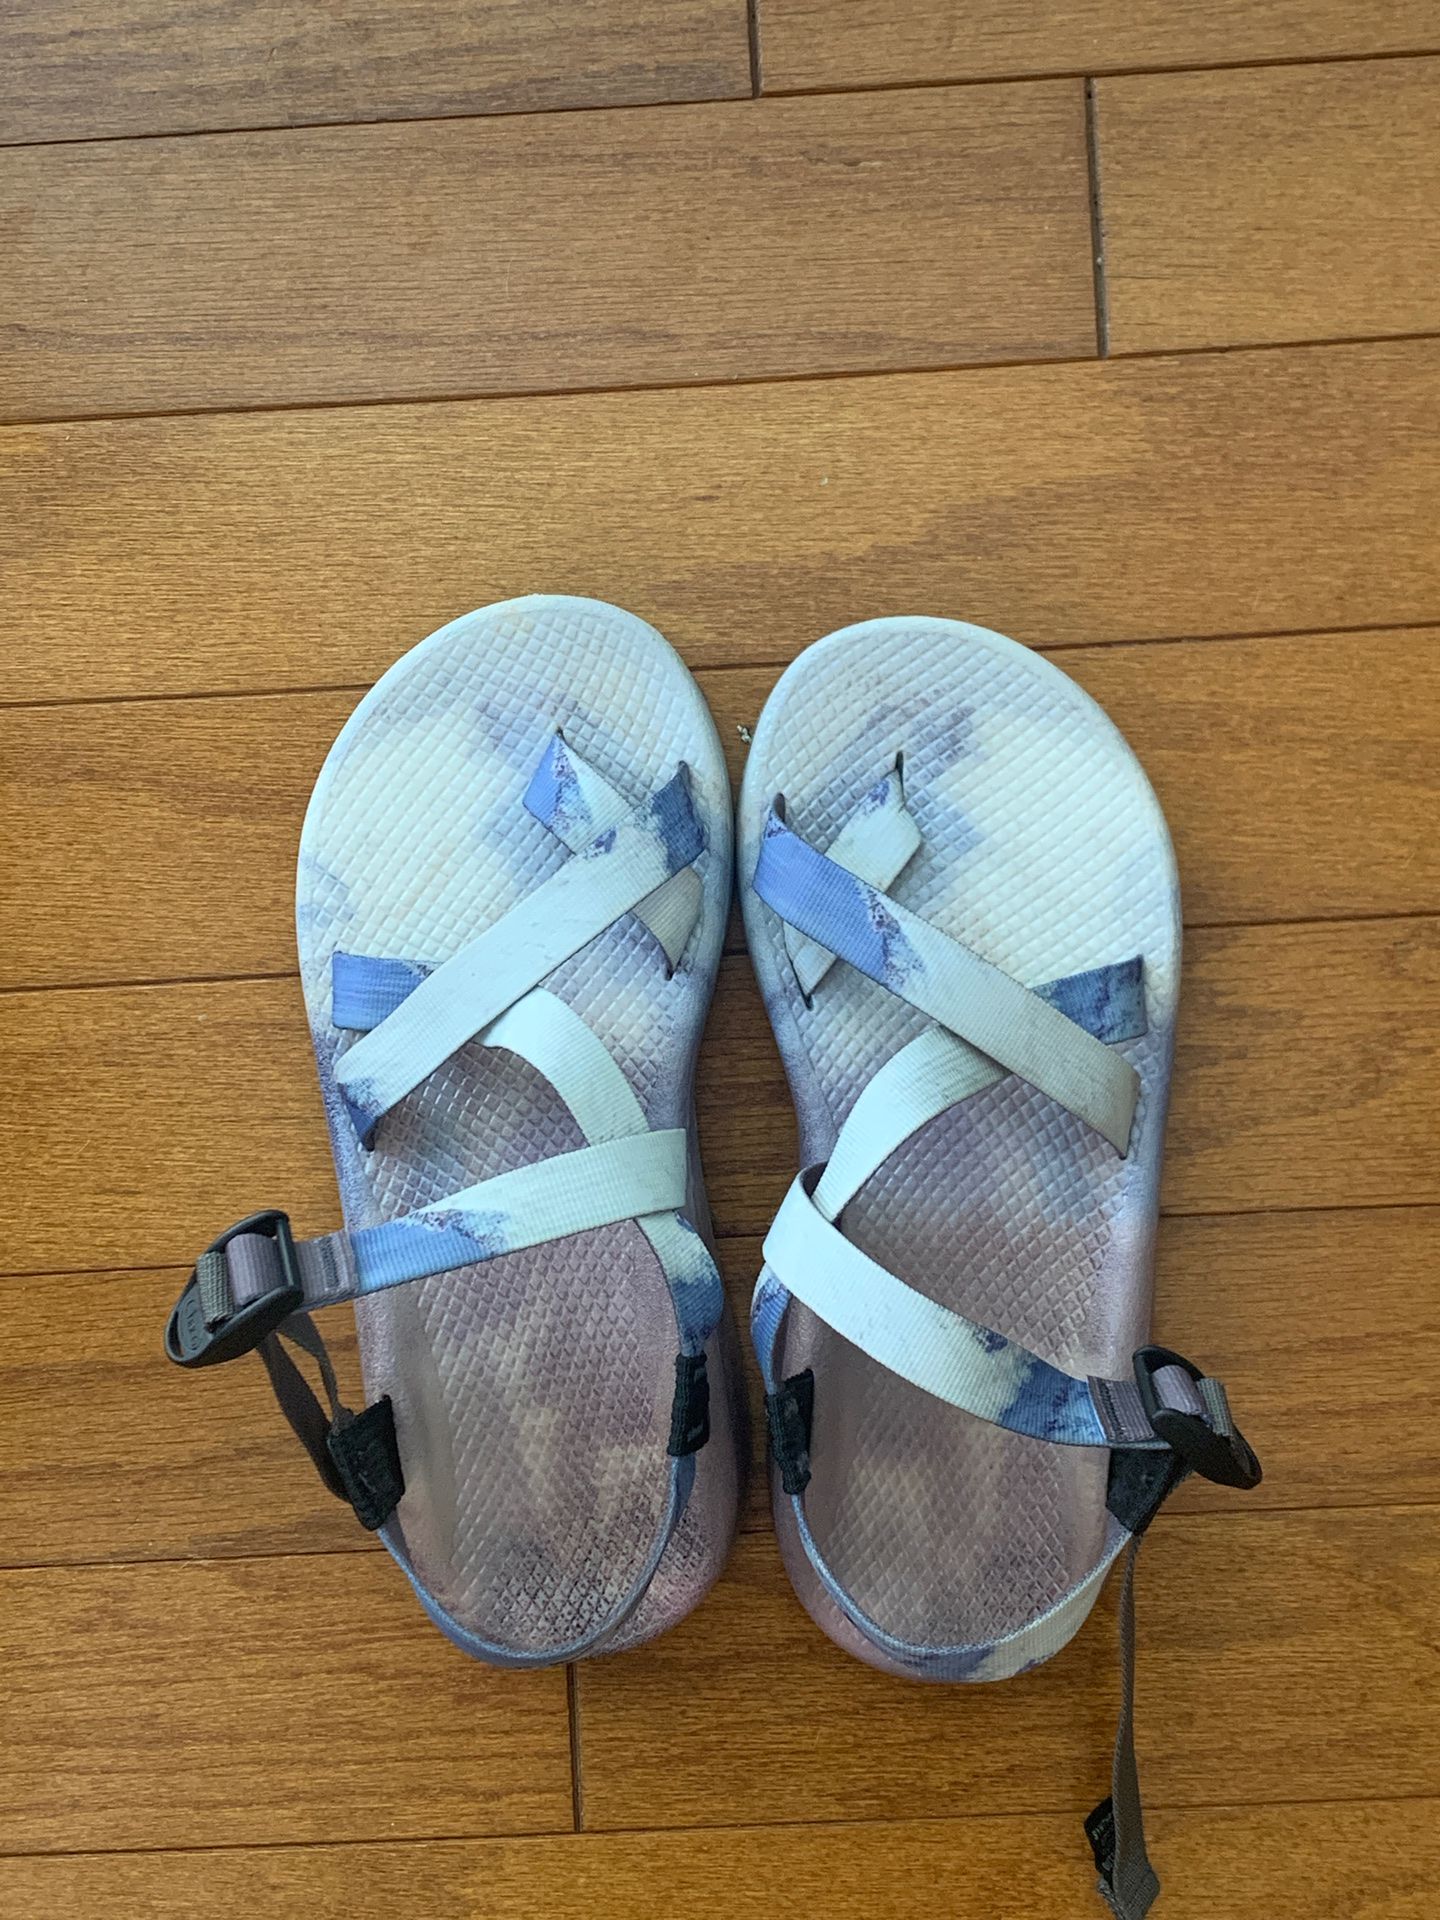 Brand new* Unisex Mountain Chacos size 8